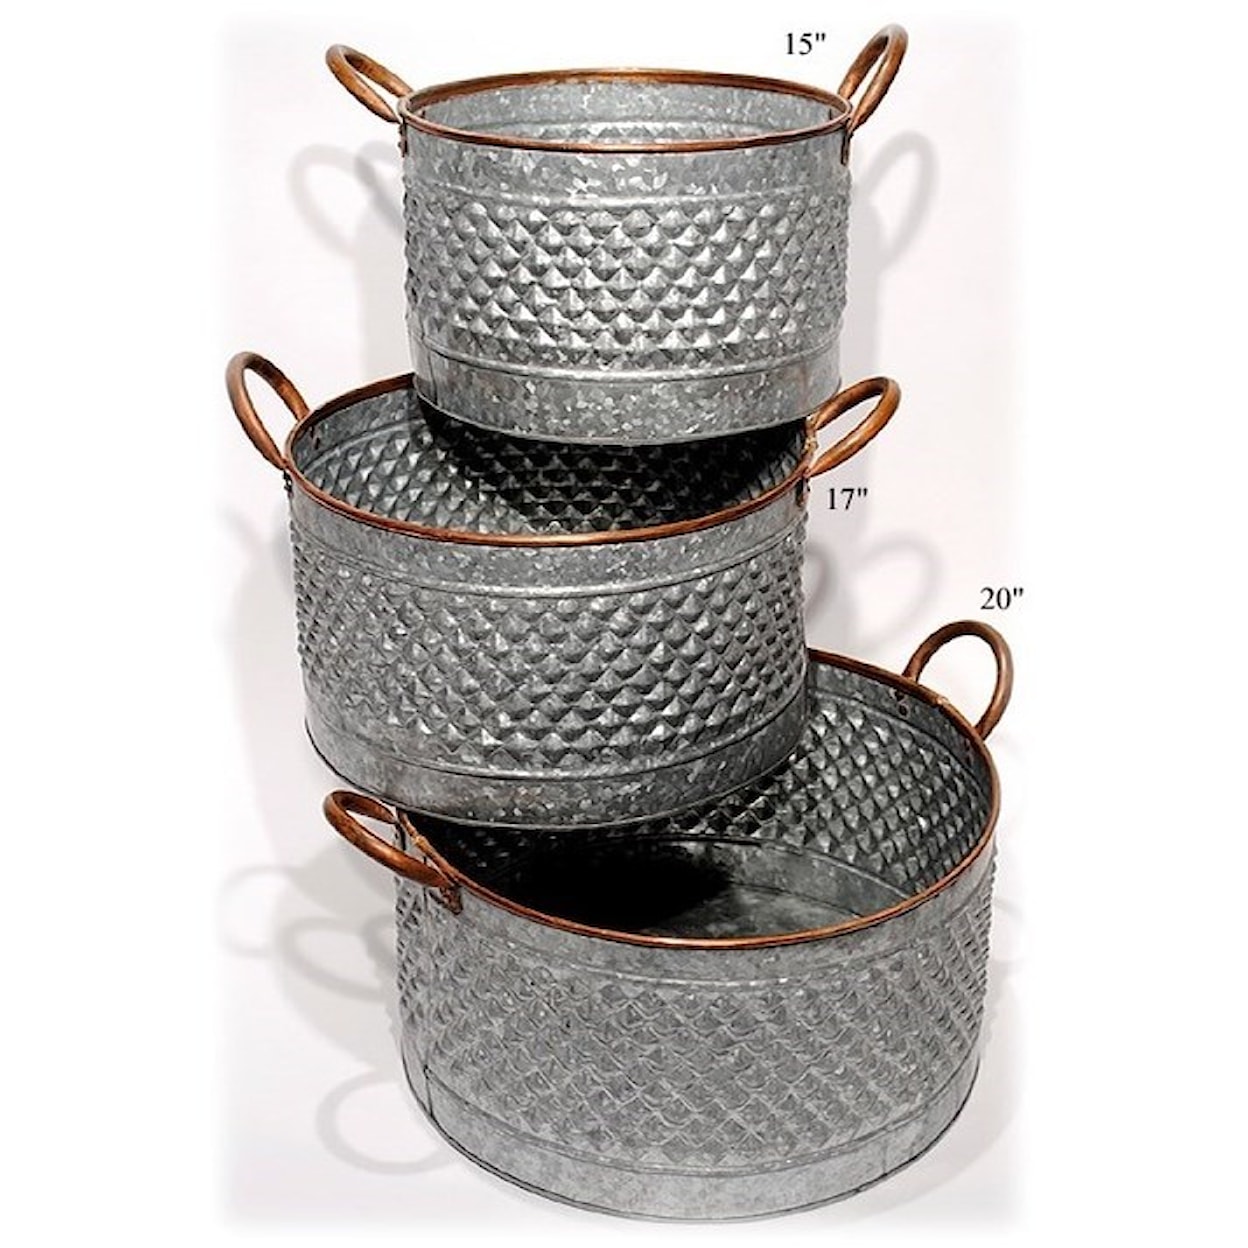 Will's Company Accents Galvanized Round Planters Set of 3 - 15"/17"